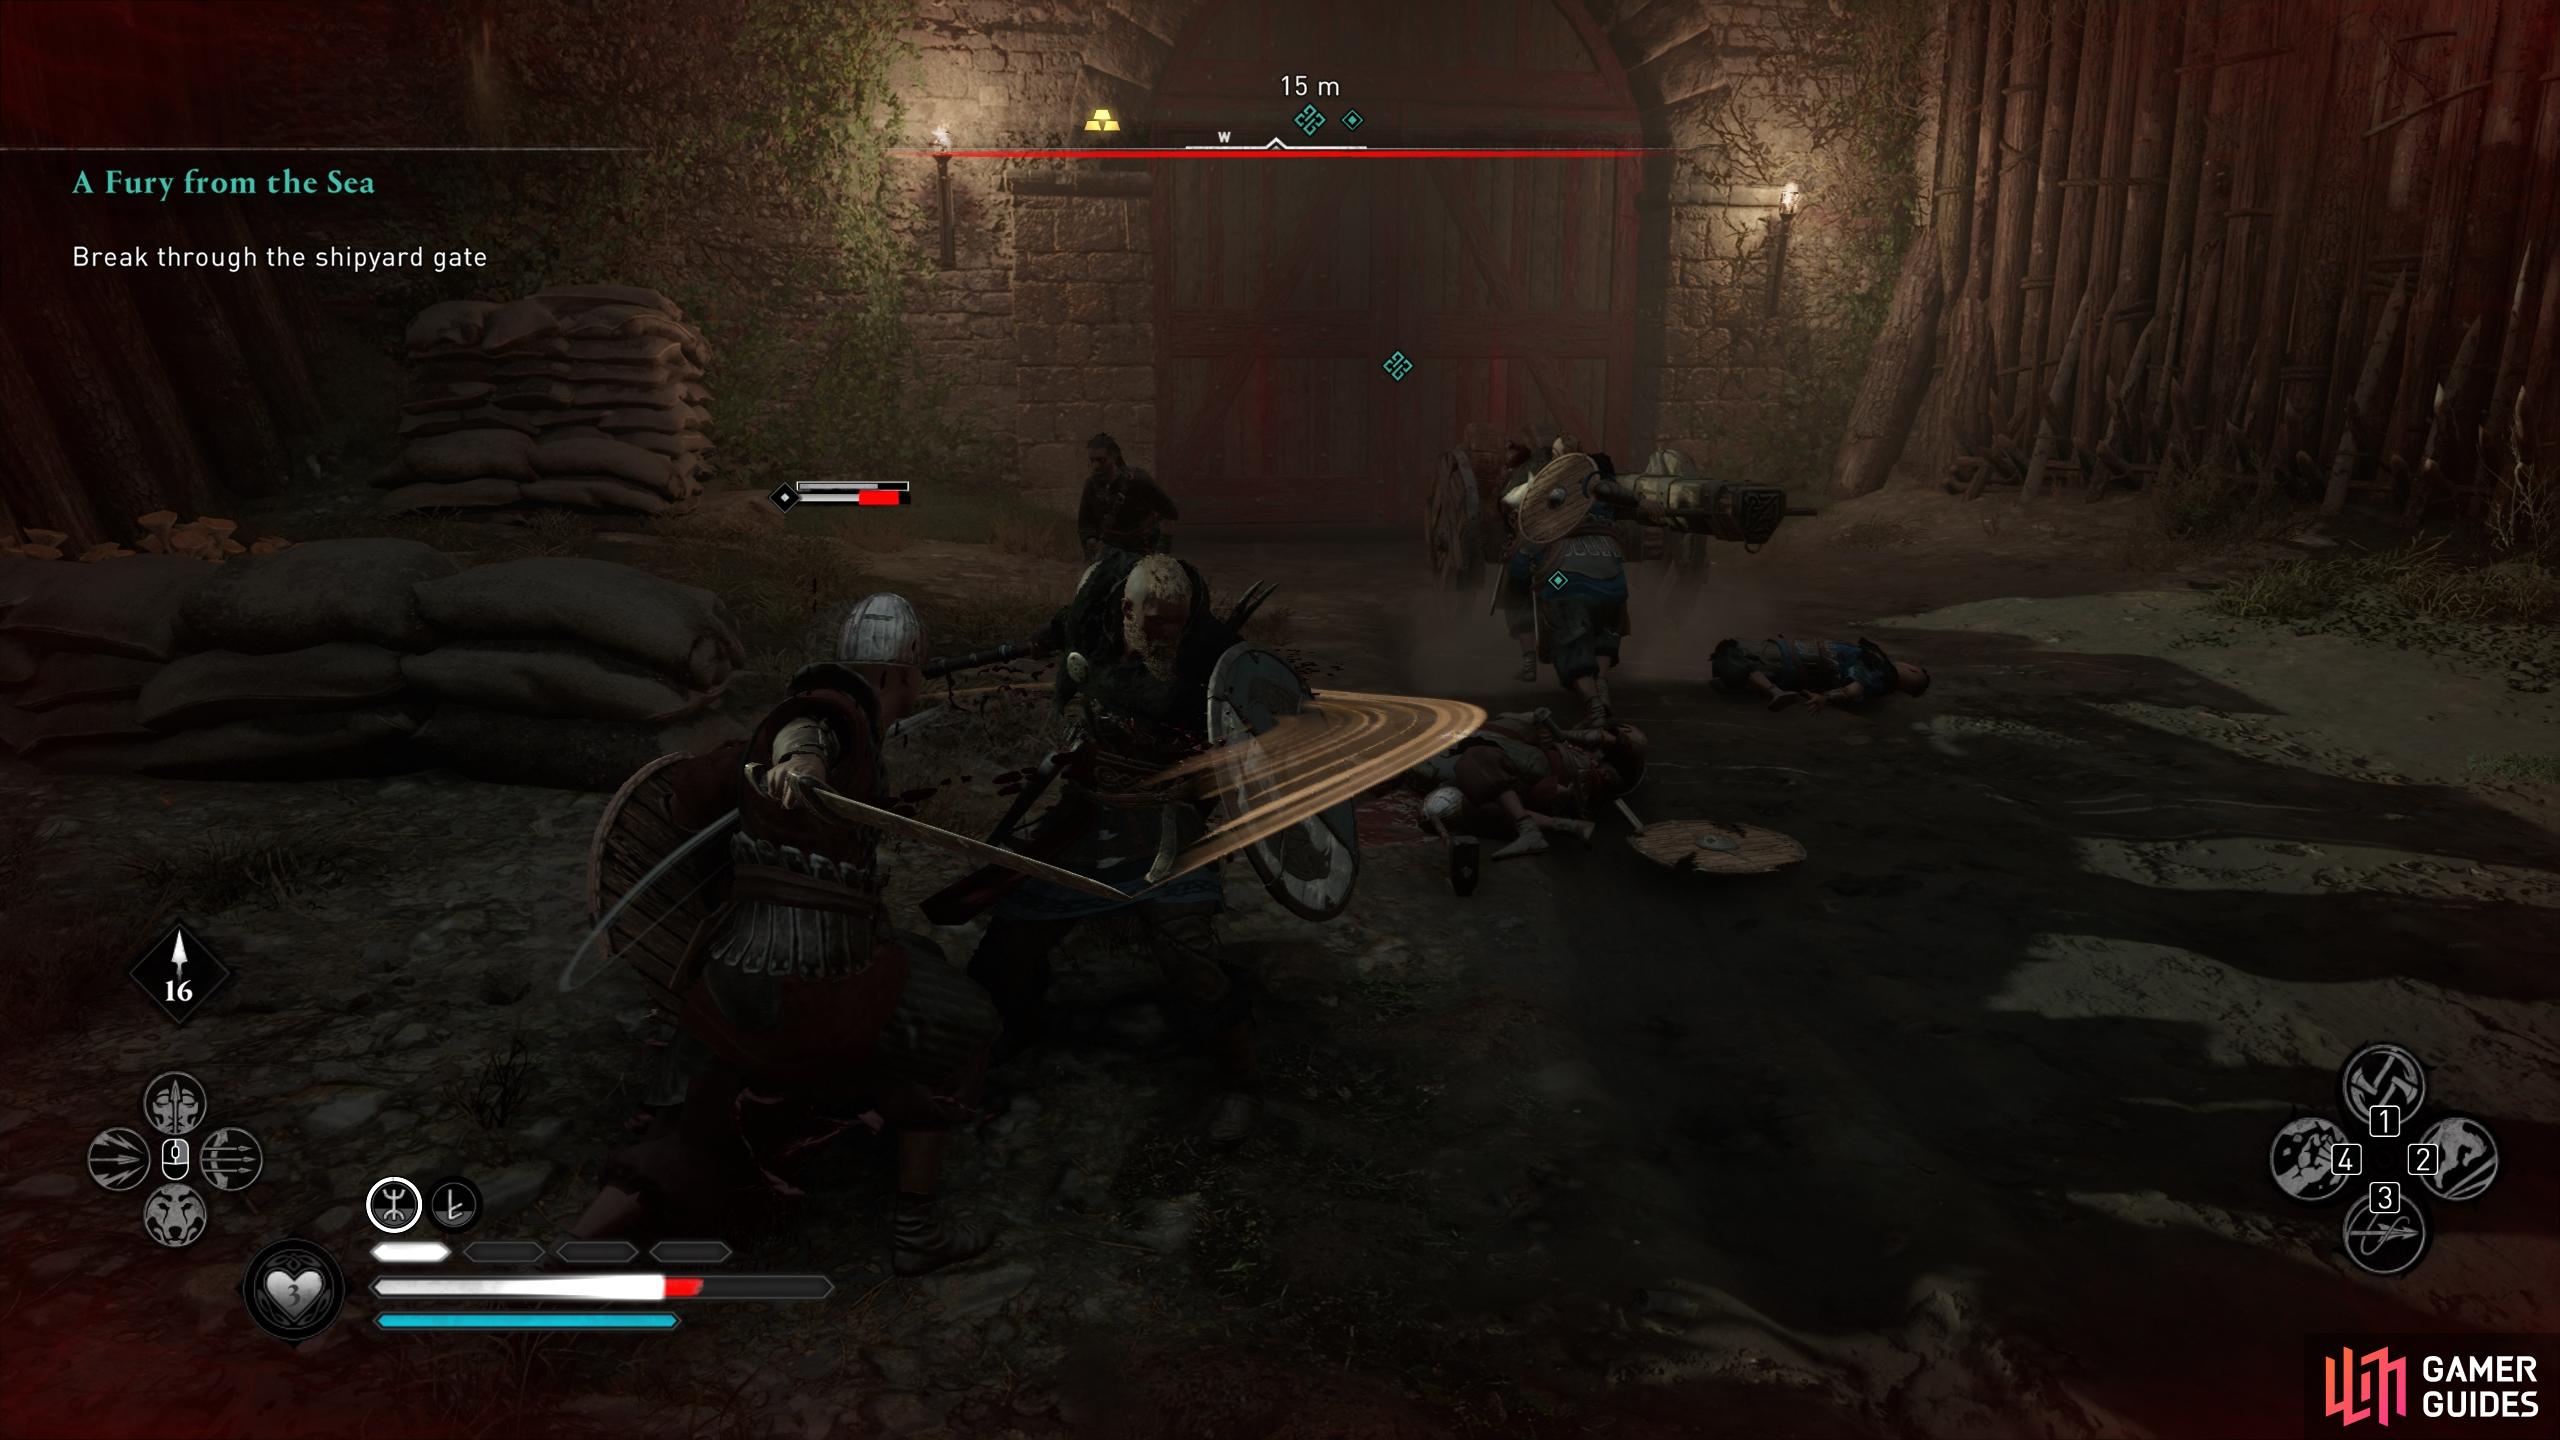 You'll need to kill any melee units which approach the battering ram.